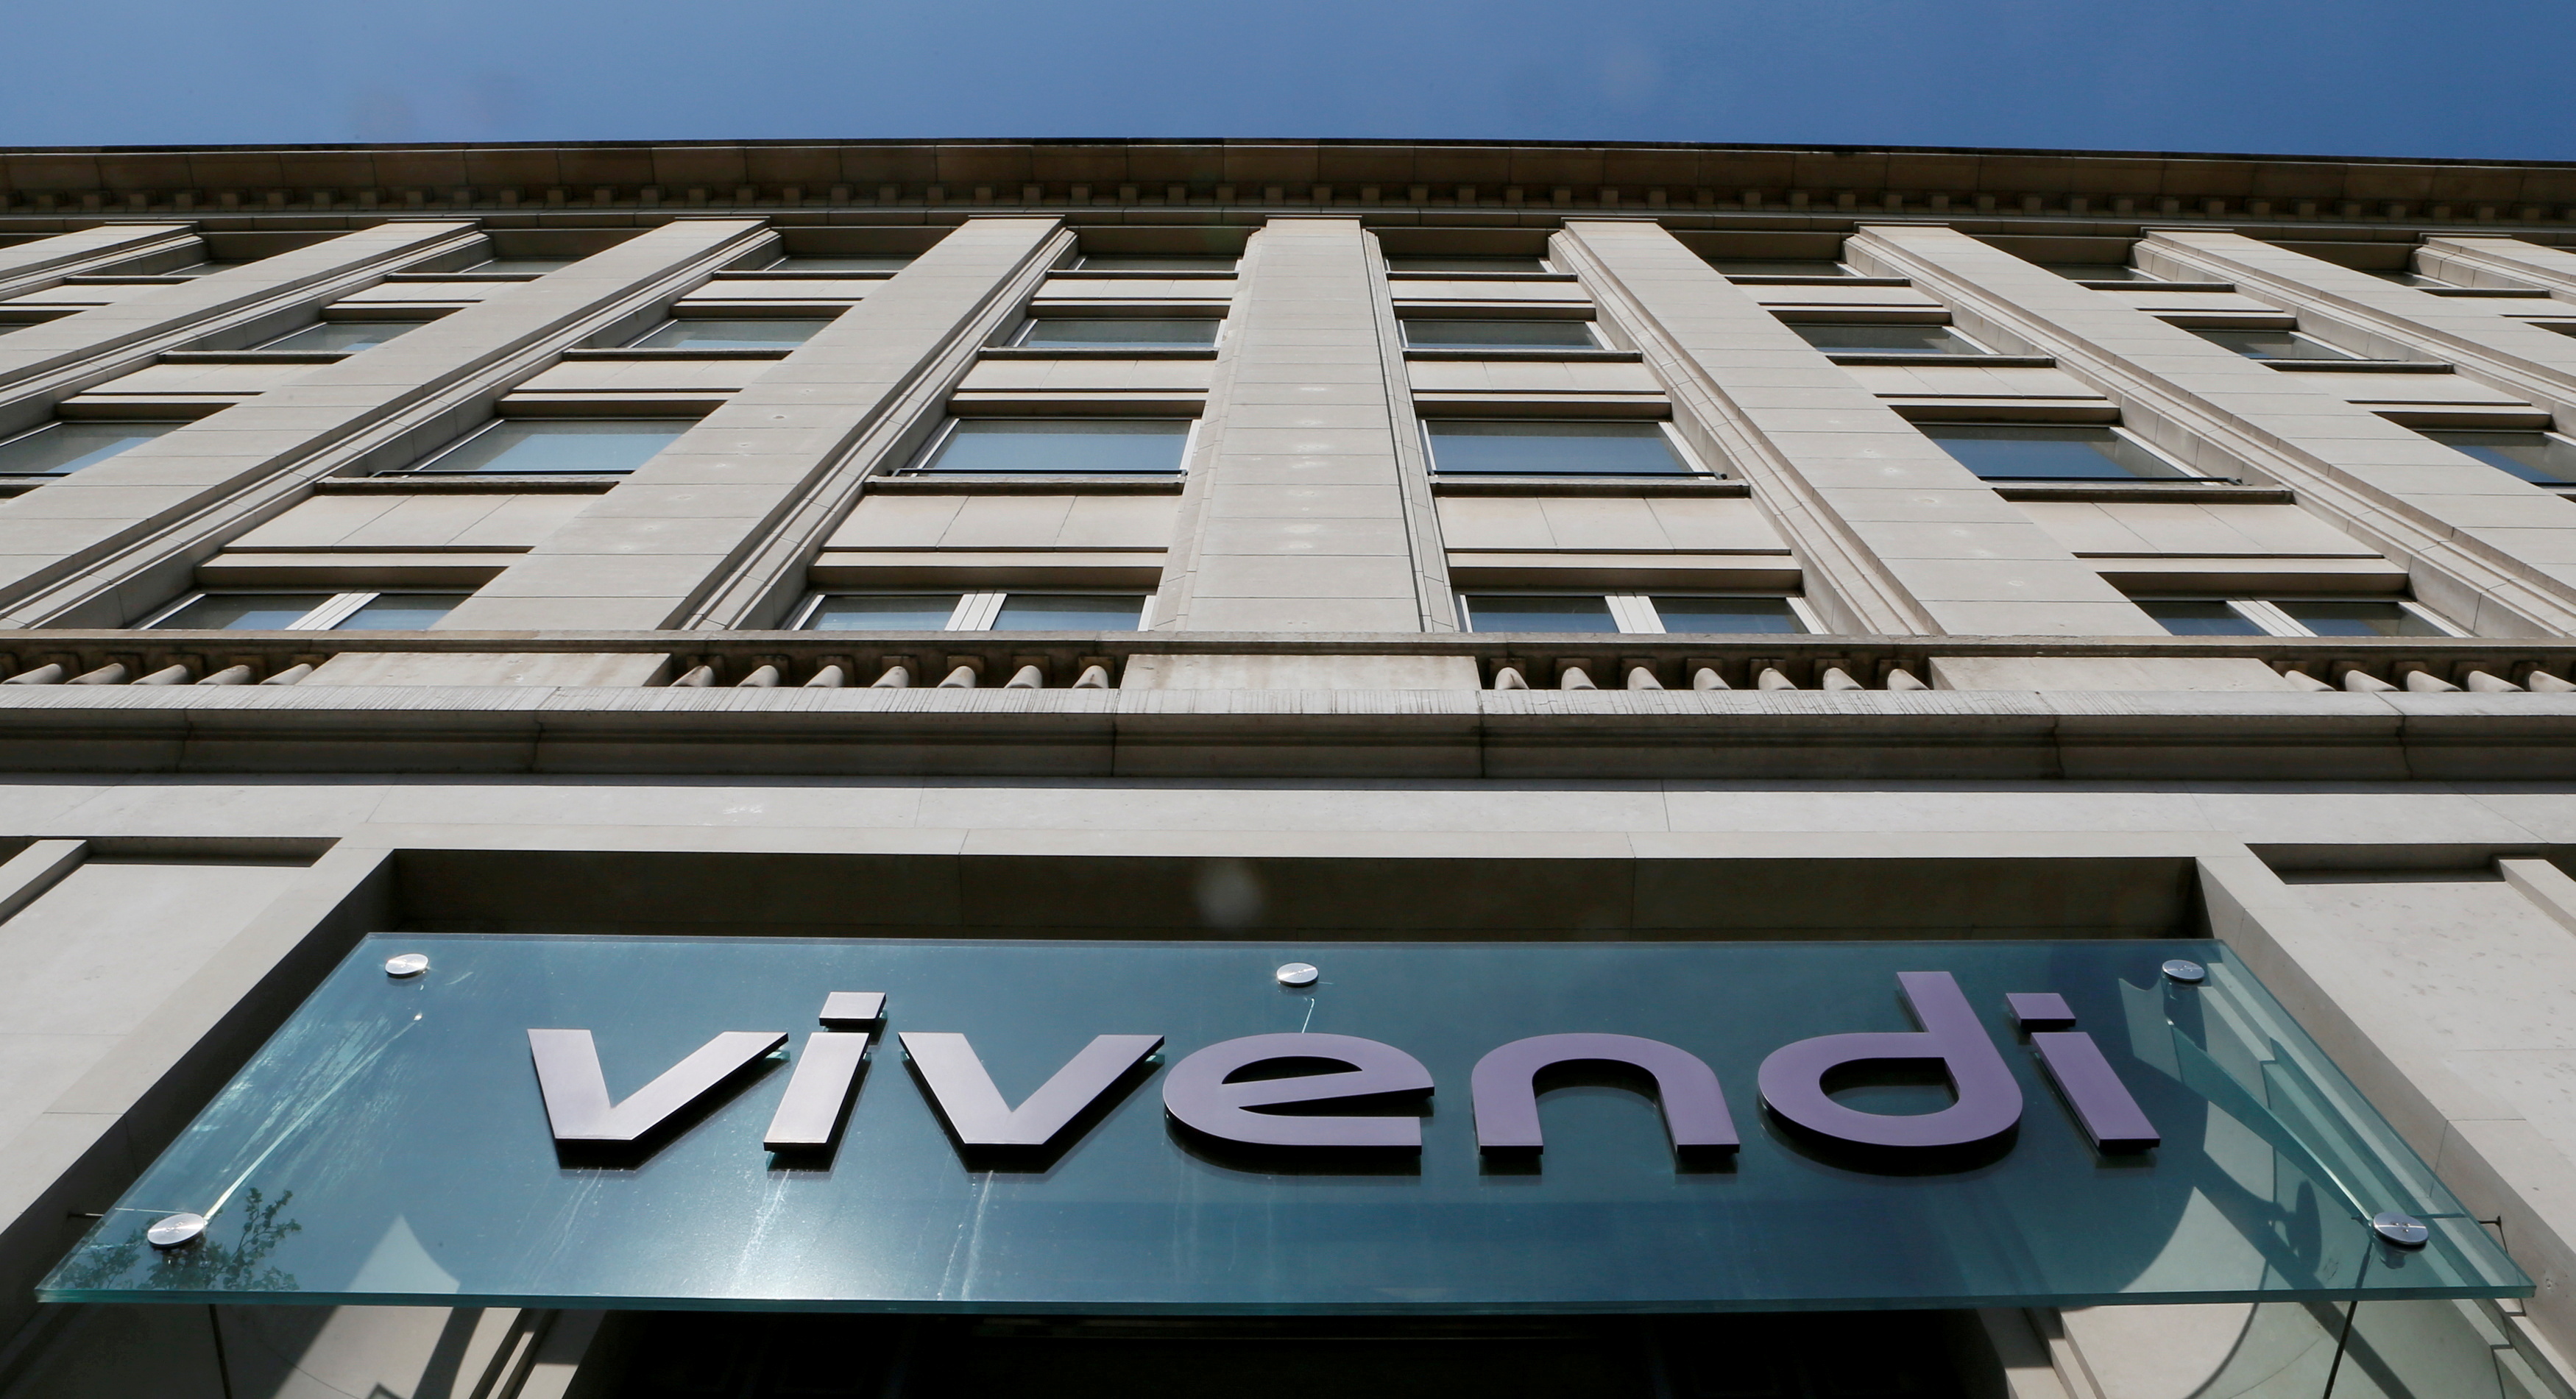 A Vivendi sign is seen at the company's headquarters in Paris, France, April 8, 2015. REUTERS/Gonzalo Fuentes/File Photo